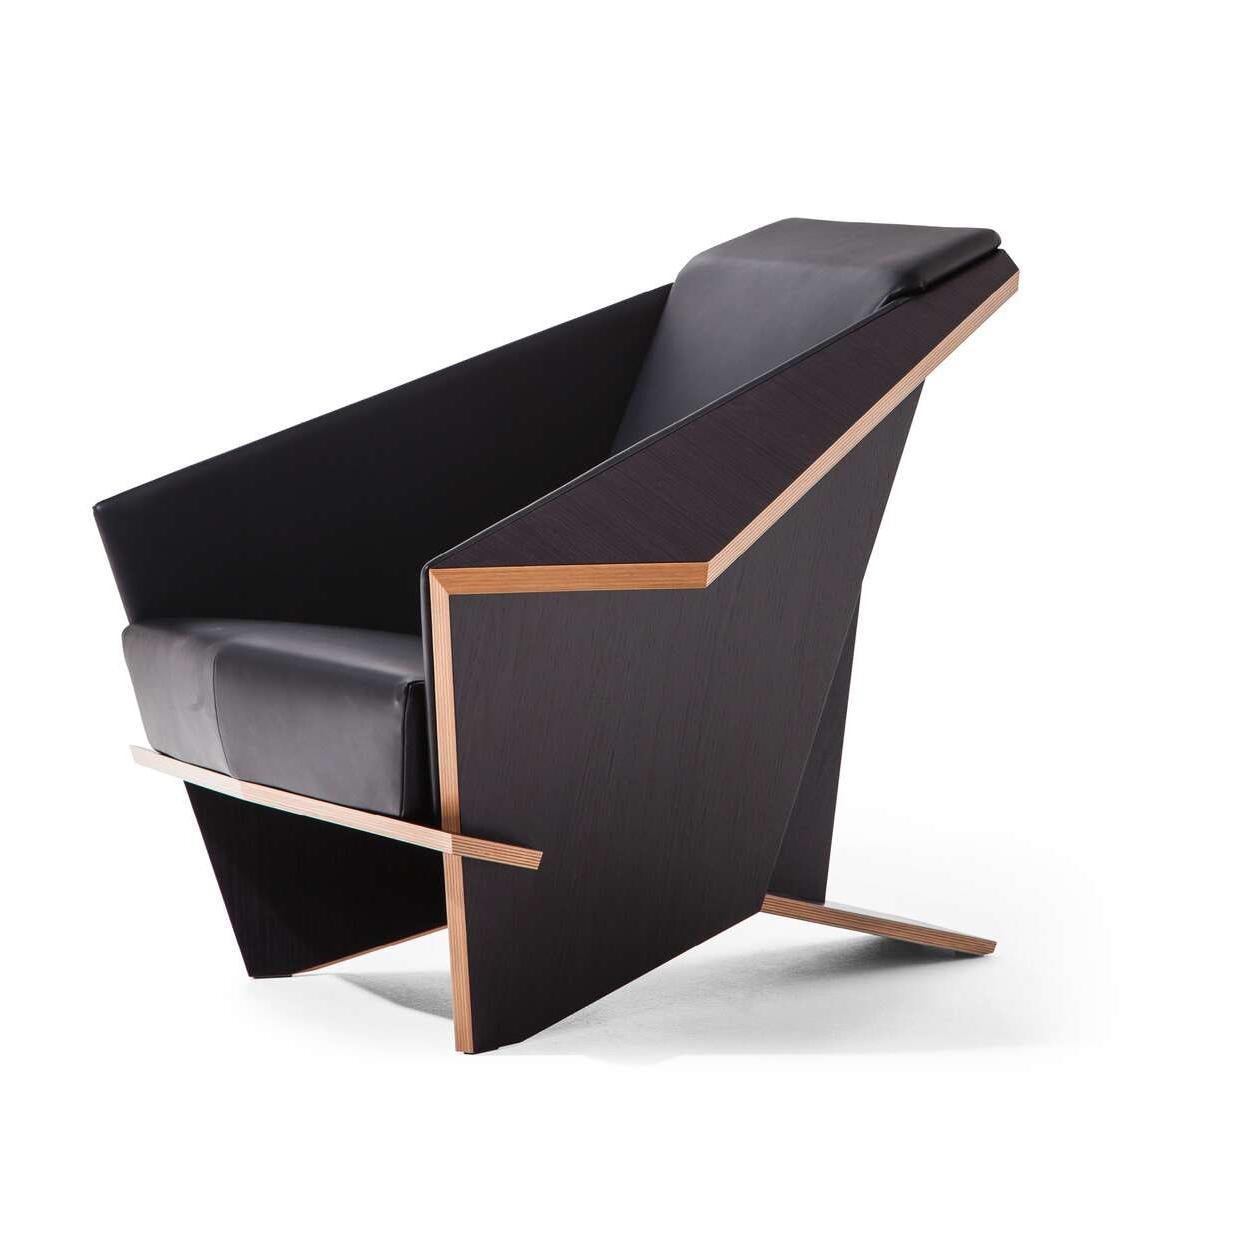 Armchair designed by Frank Lloyd Wrigh circa 1949, relaunched in 1986-90.

Leather and stained black oak edition.

Manufactured by Cassina in Italy.

Origami in wood, emblematic of Frank Lloyd Wright’s design maturity and ever-surprising